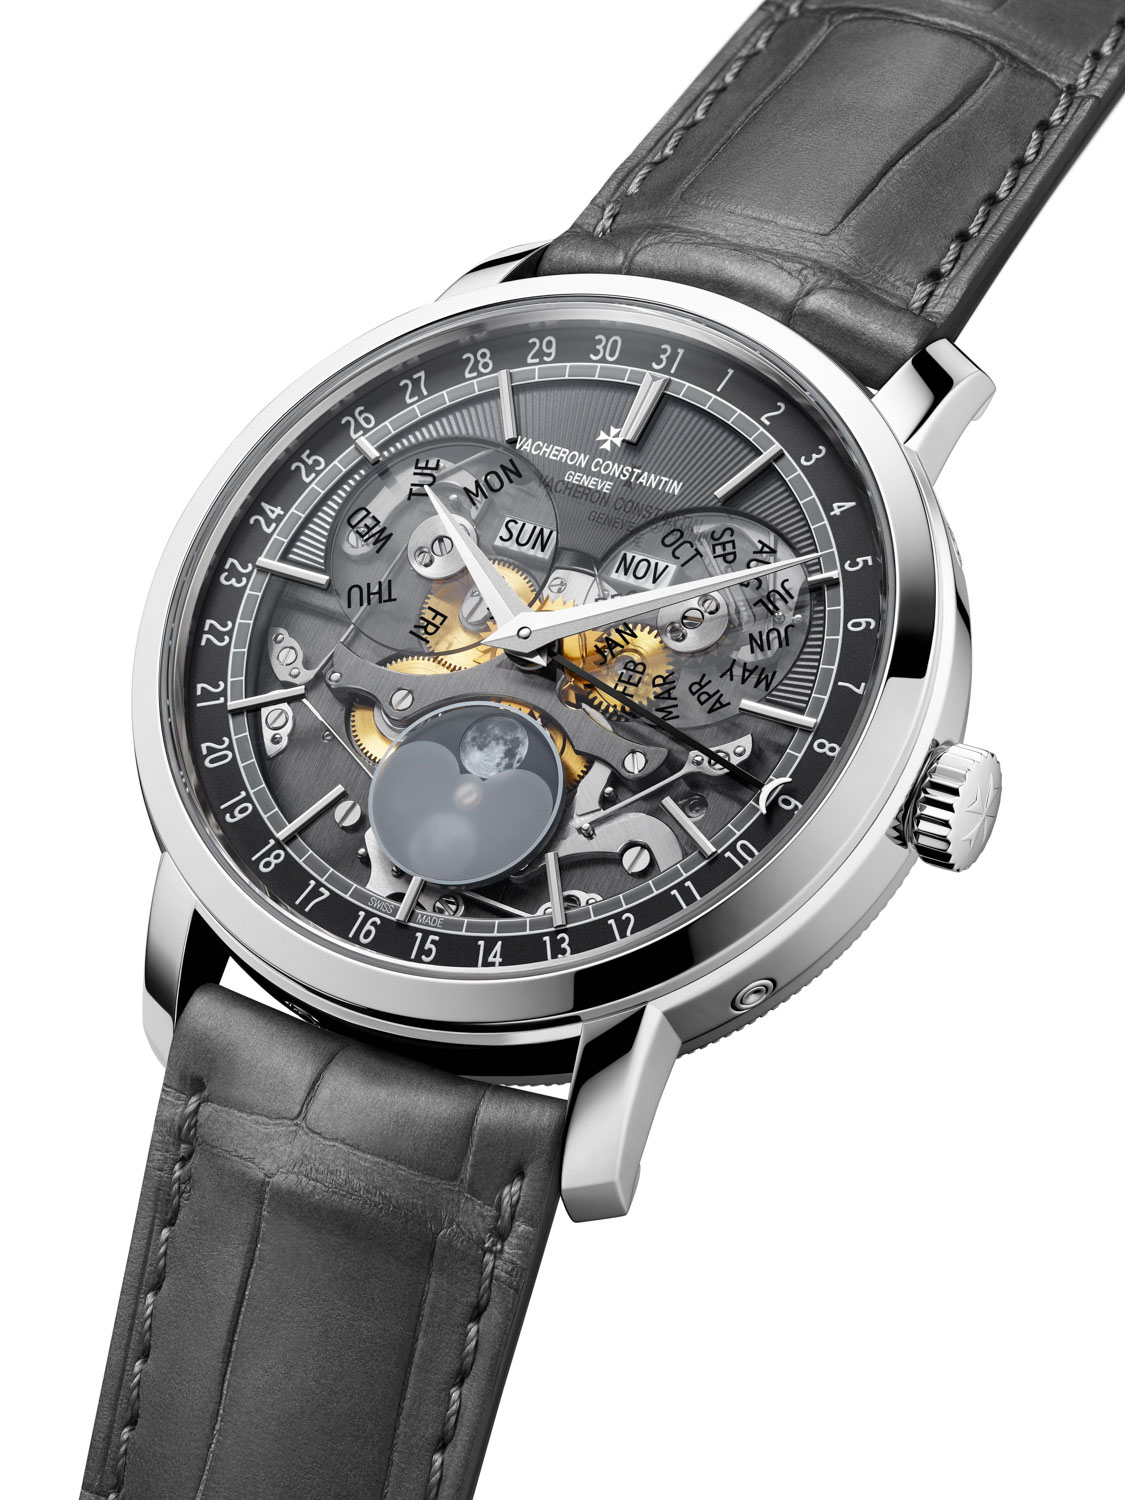 The Vacheron Constantin Traditionnelle Complete Calendar Openface in 18K white gold